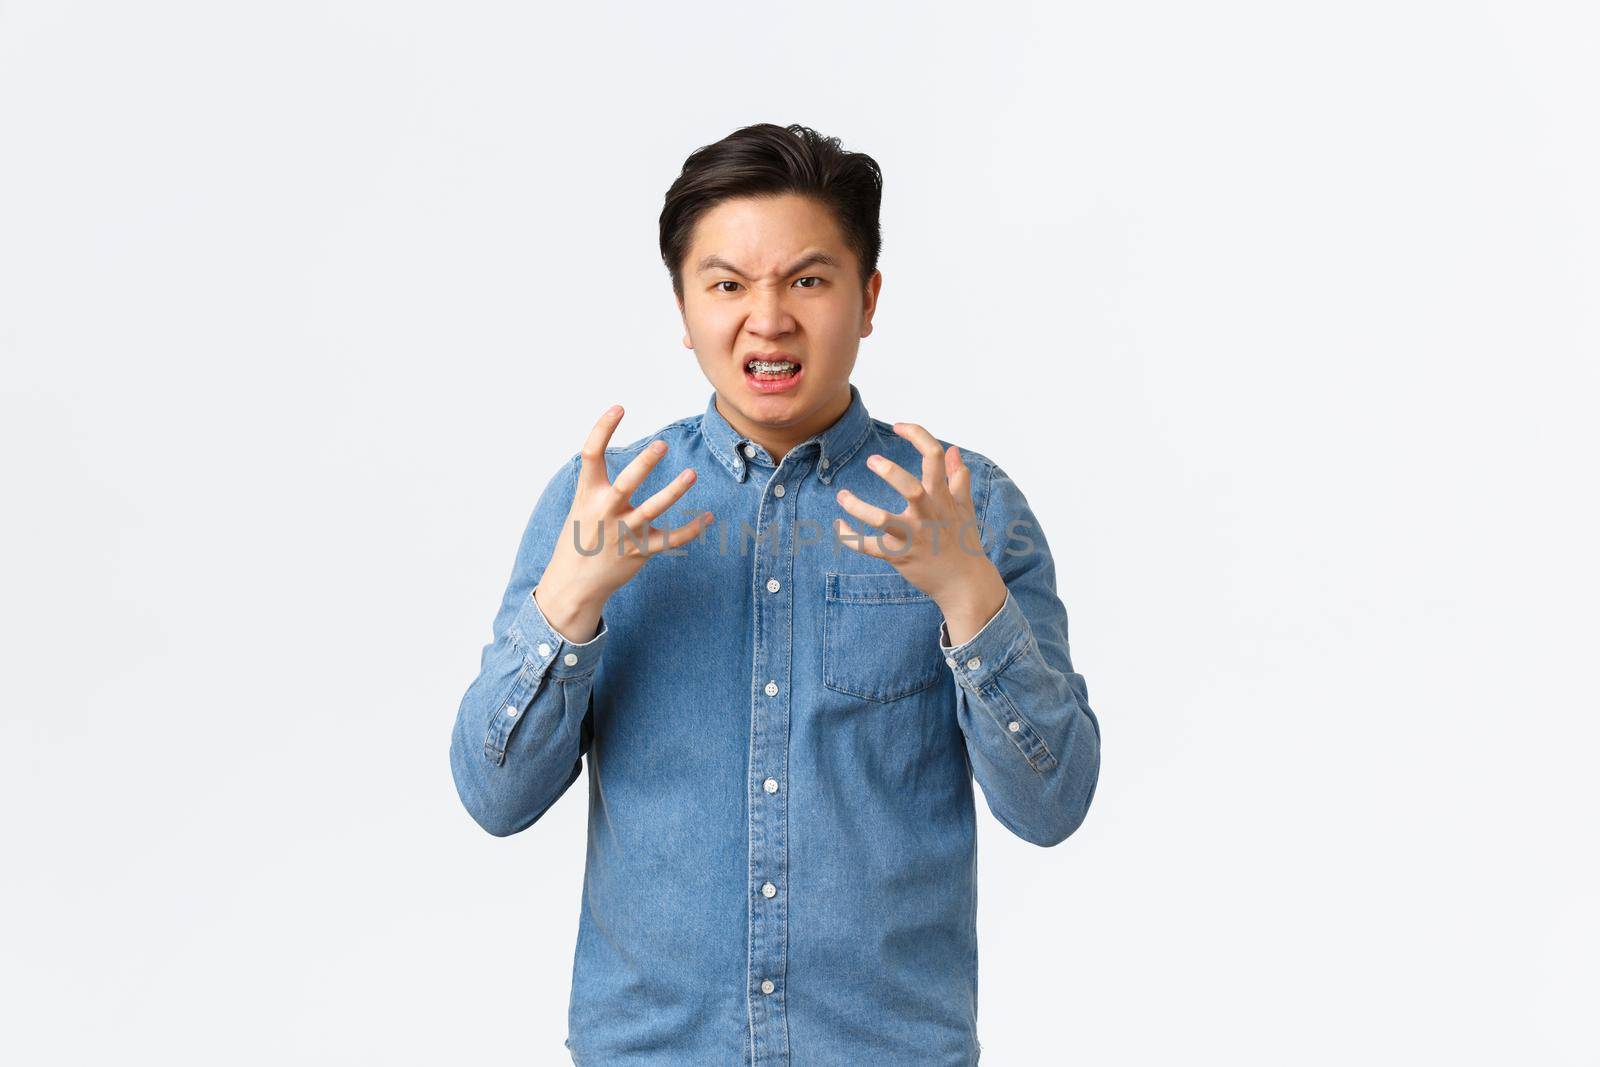 Outraged aggressive and pissed-off asian man shaking hands frustrated and mad, frowning and grimacing, swearing angry at someone, feeling furious, standing white background.